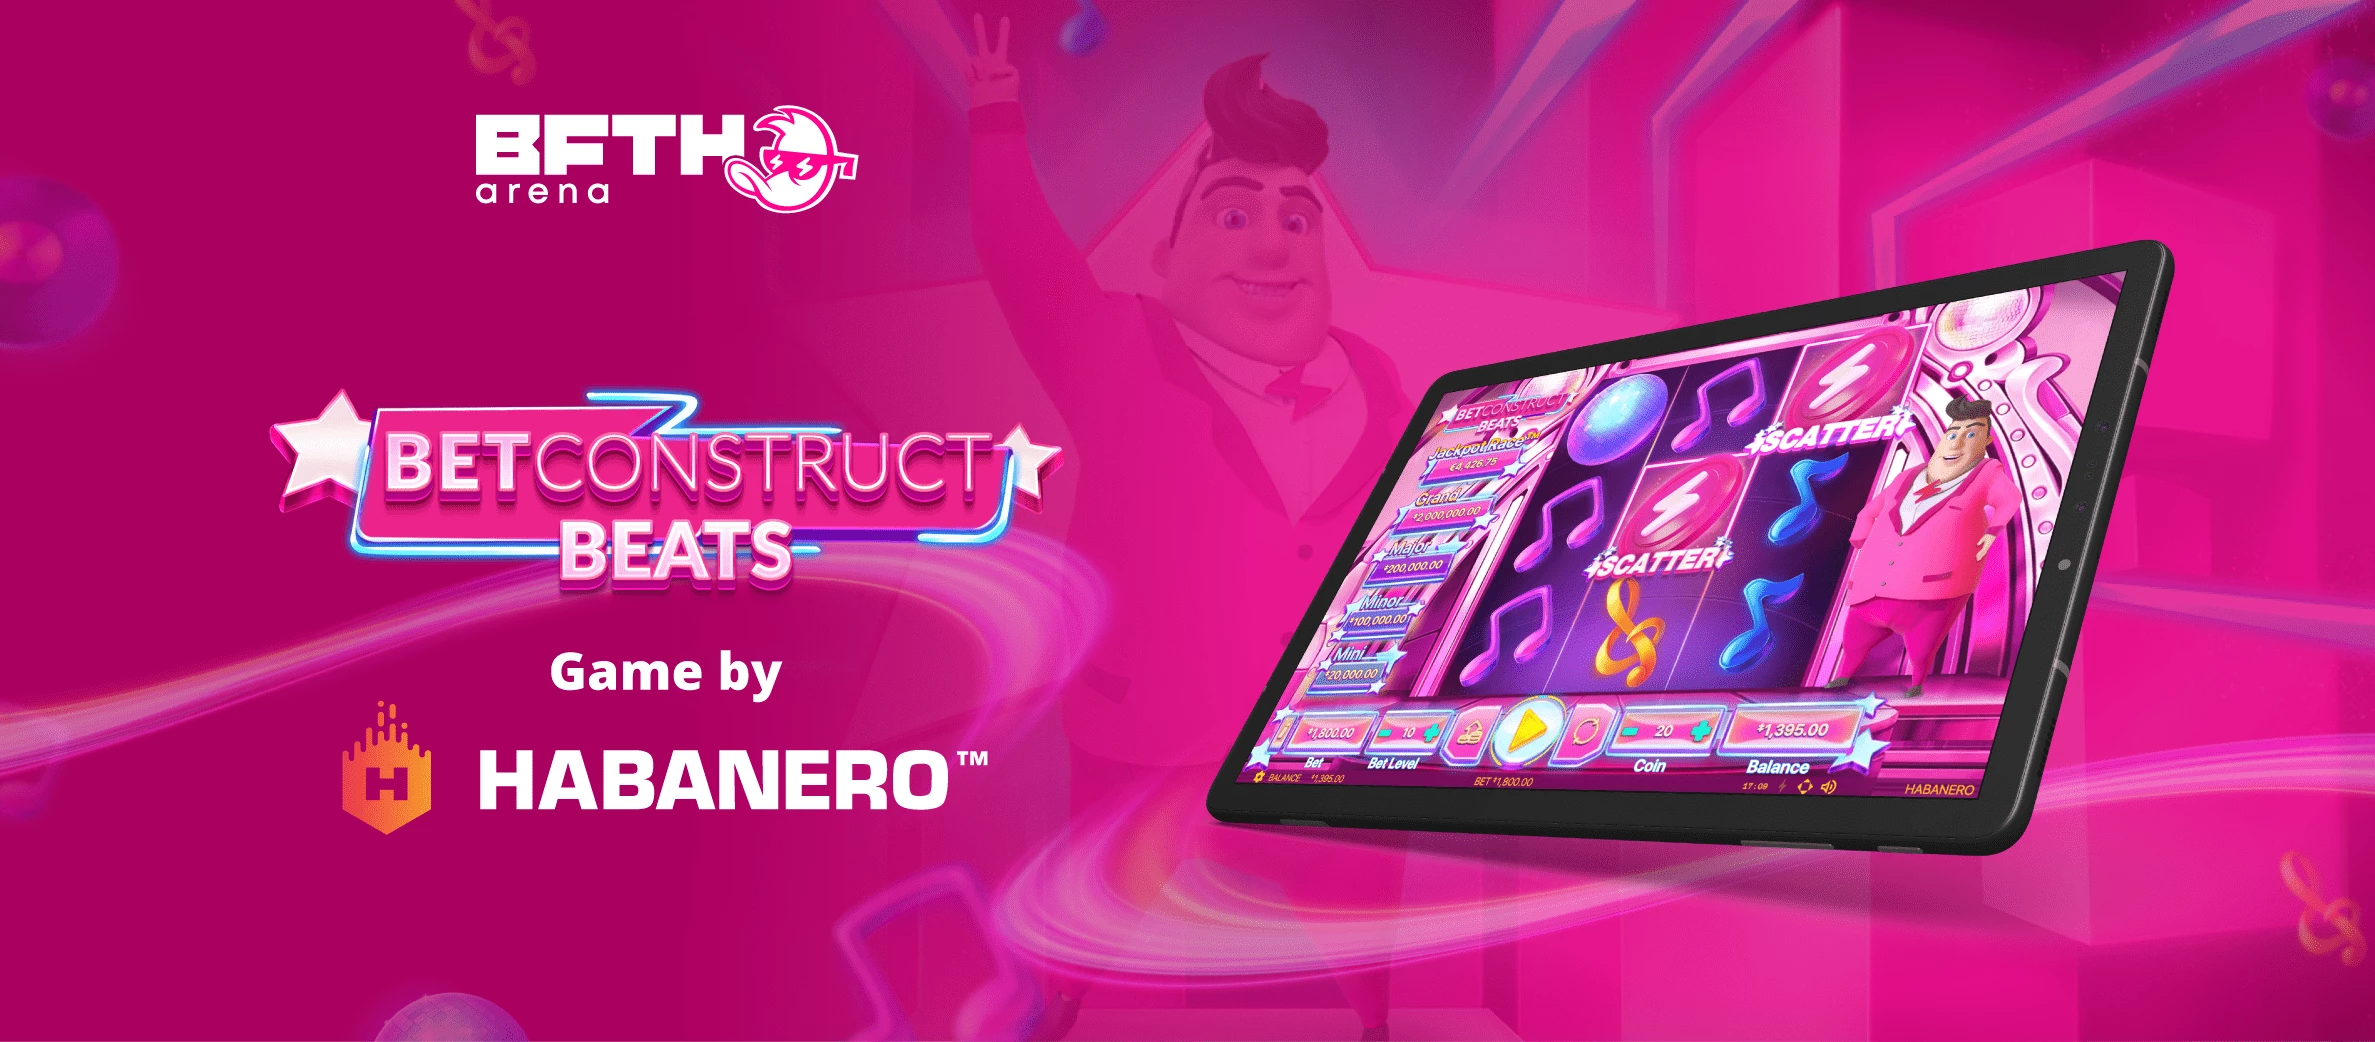 BetConstruct Beats: The First Game Available within B.F.T.H. Arena Best FTN Game Awards